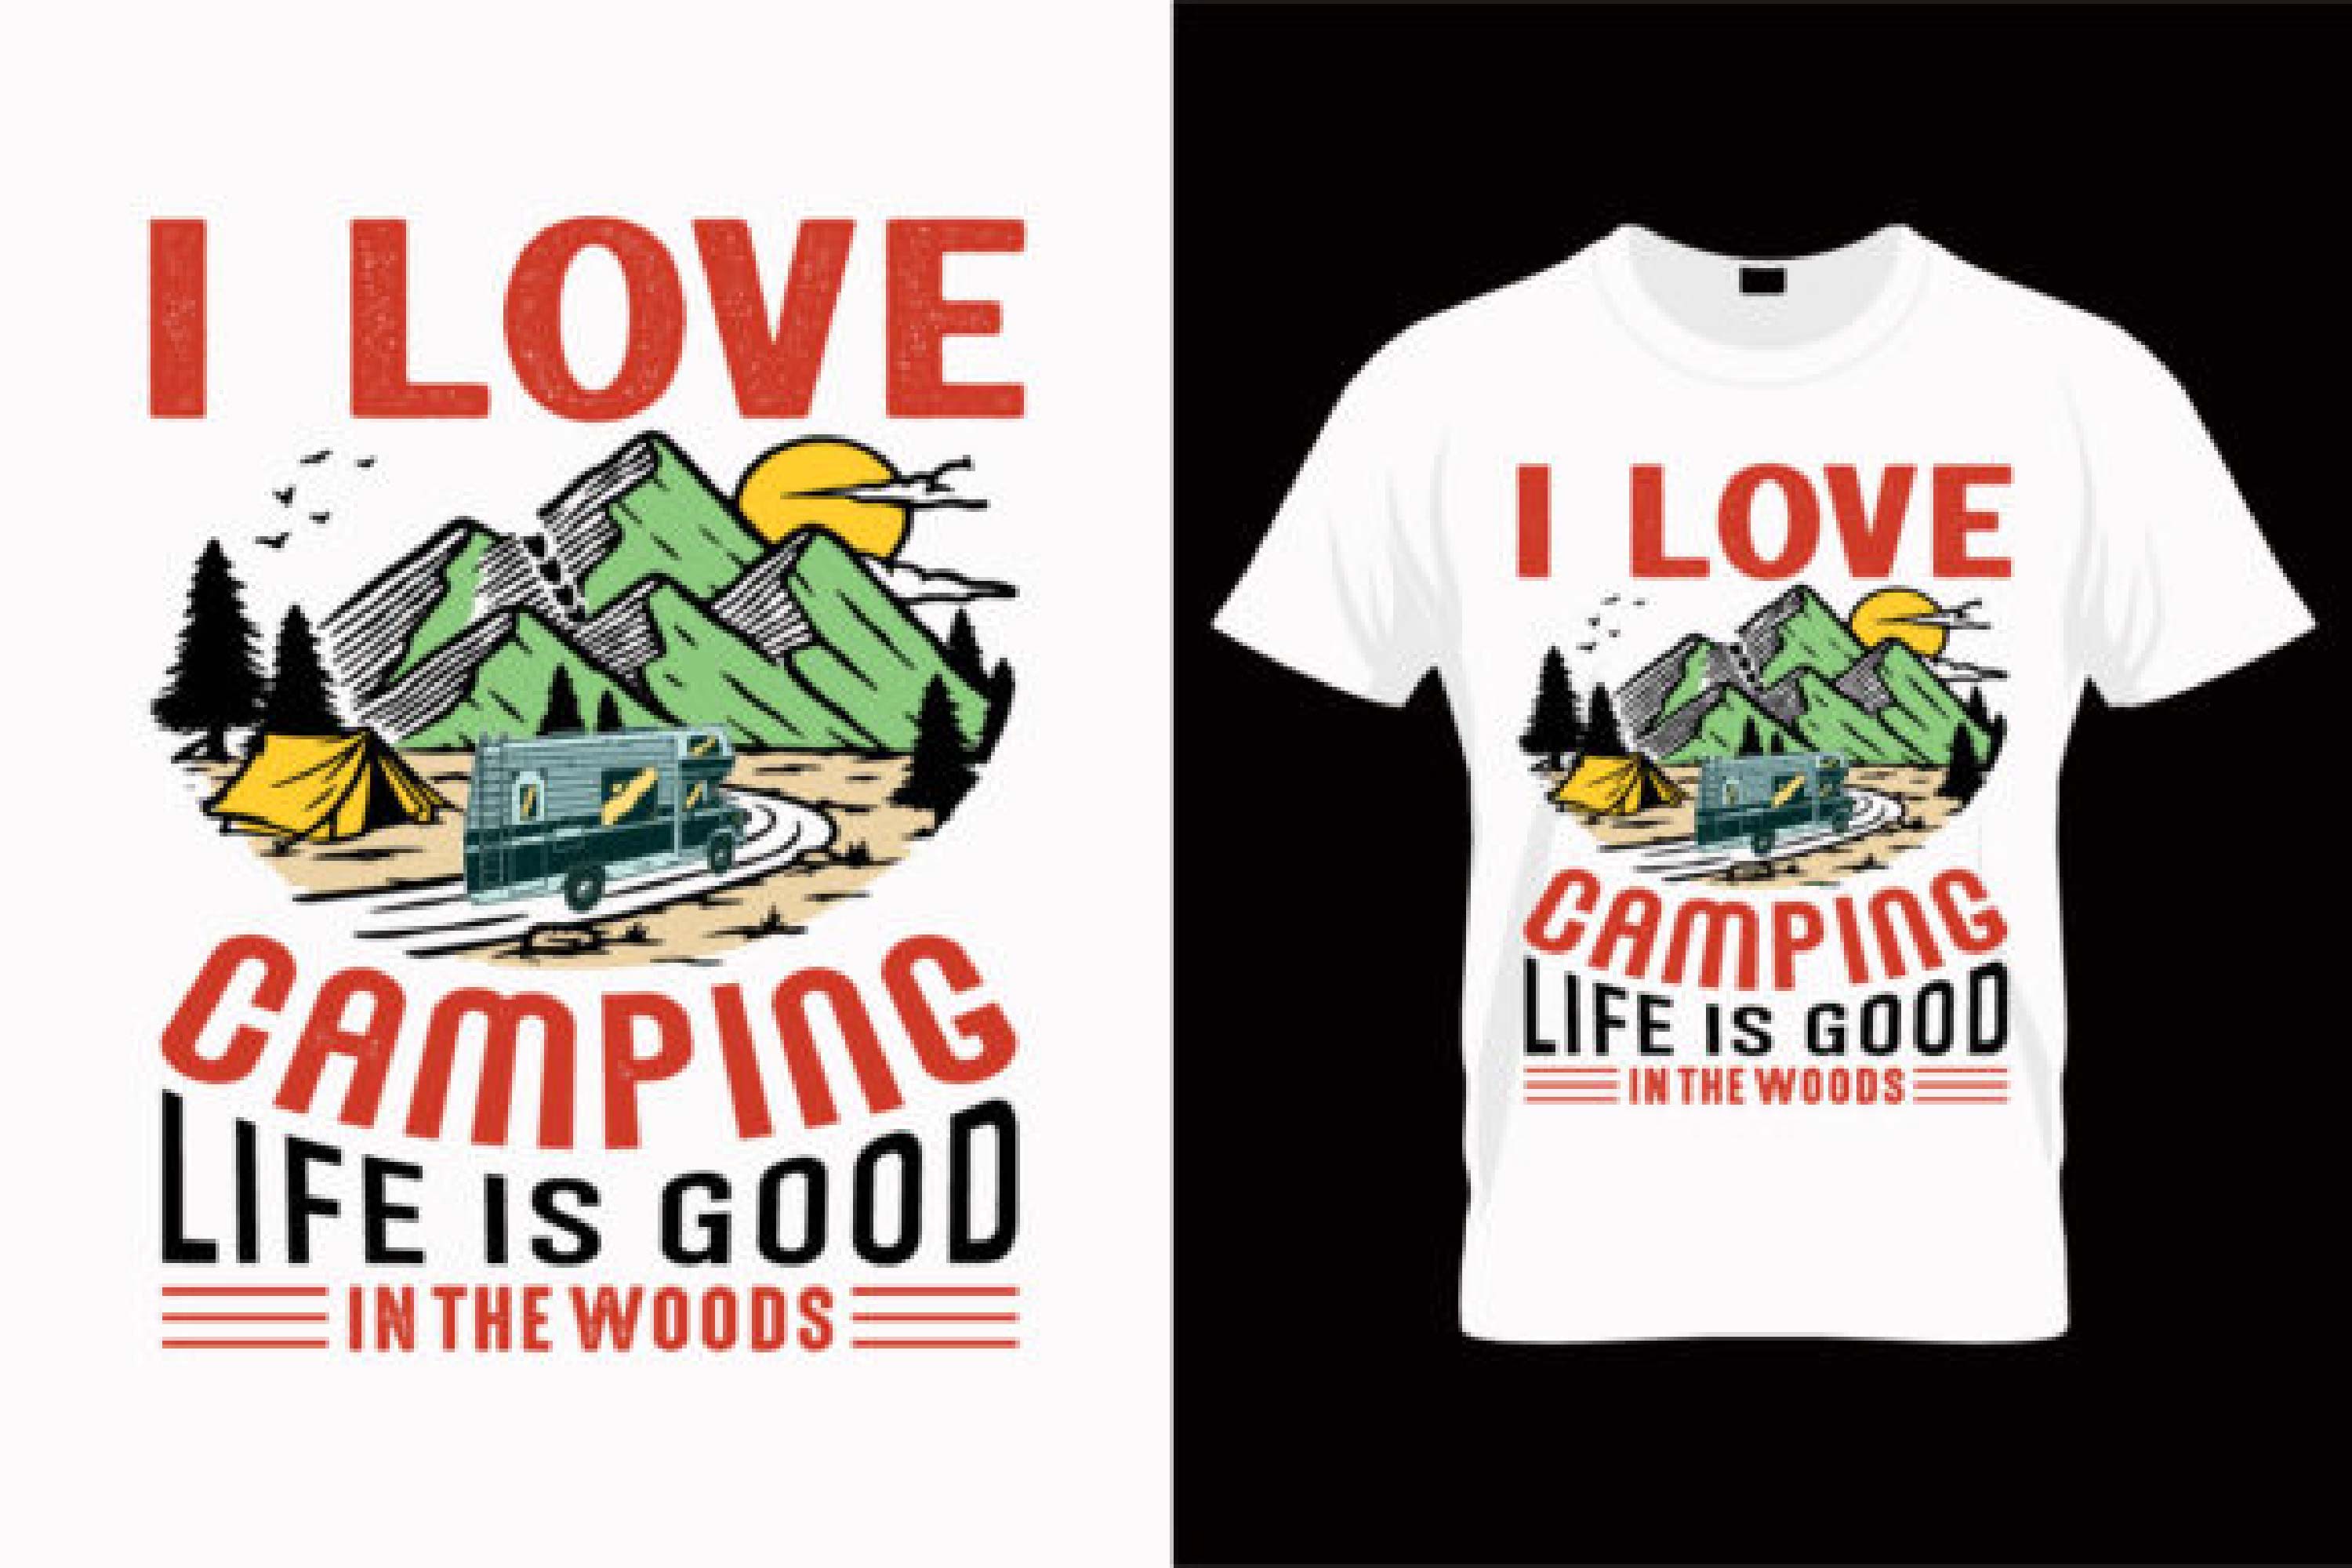 Image of a white t-shirt with an elegant print on the theme of camping and a colorful landscape.